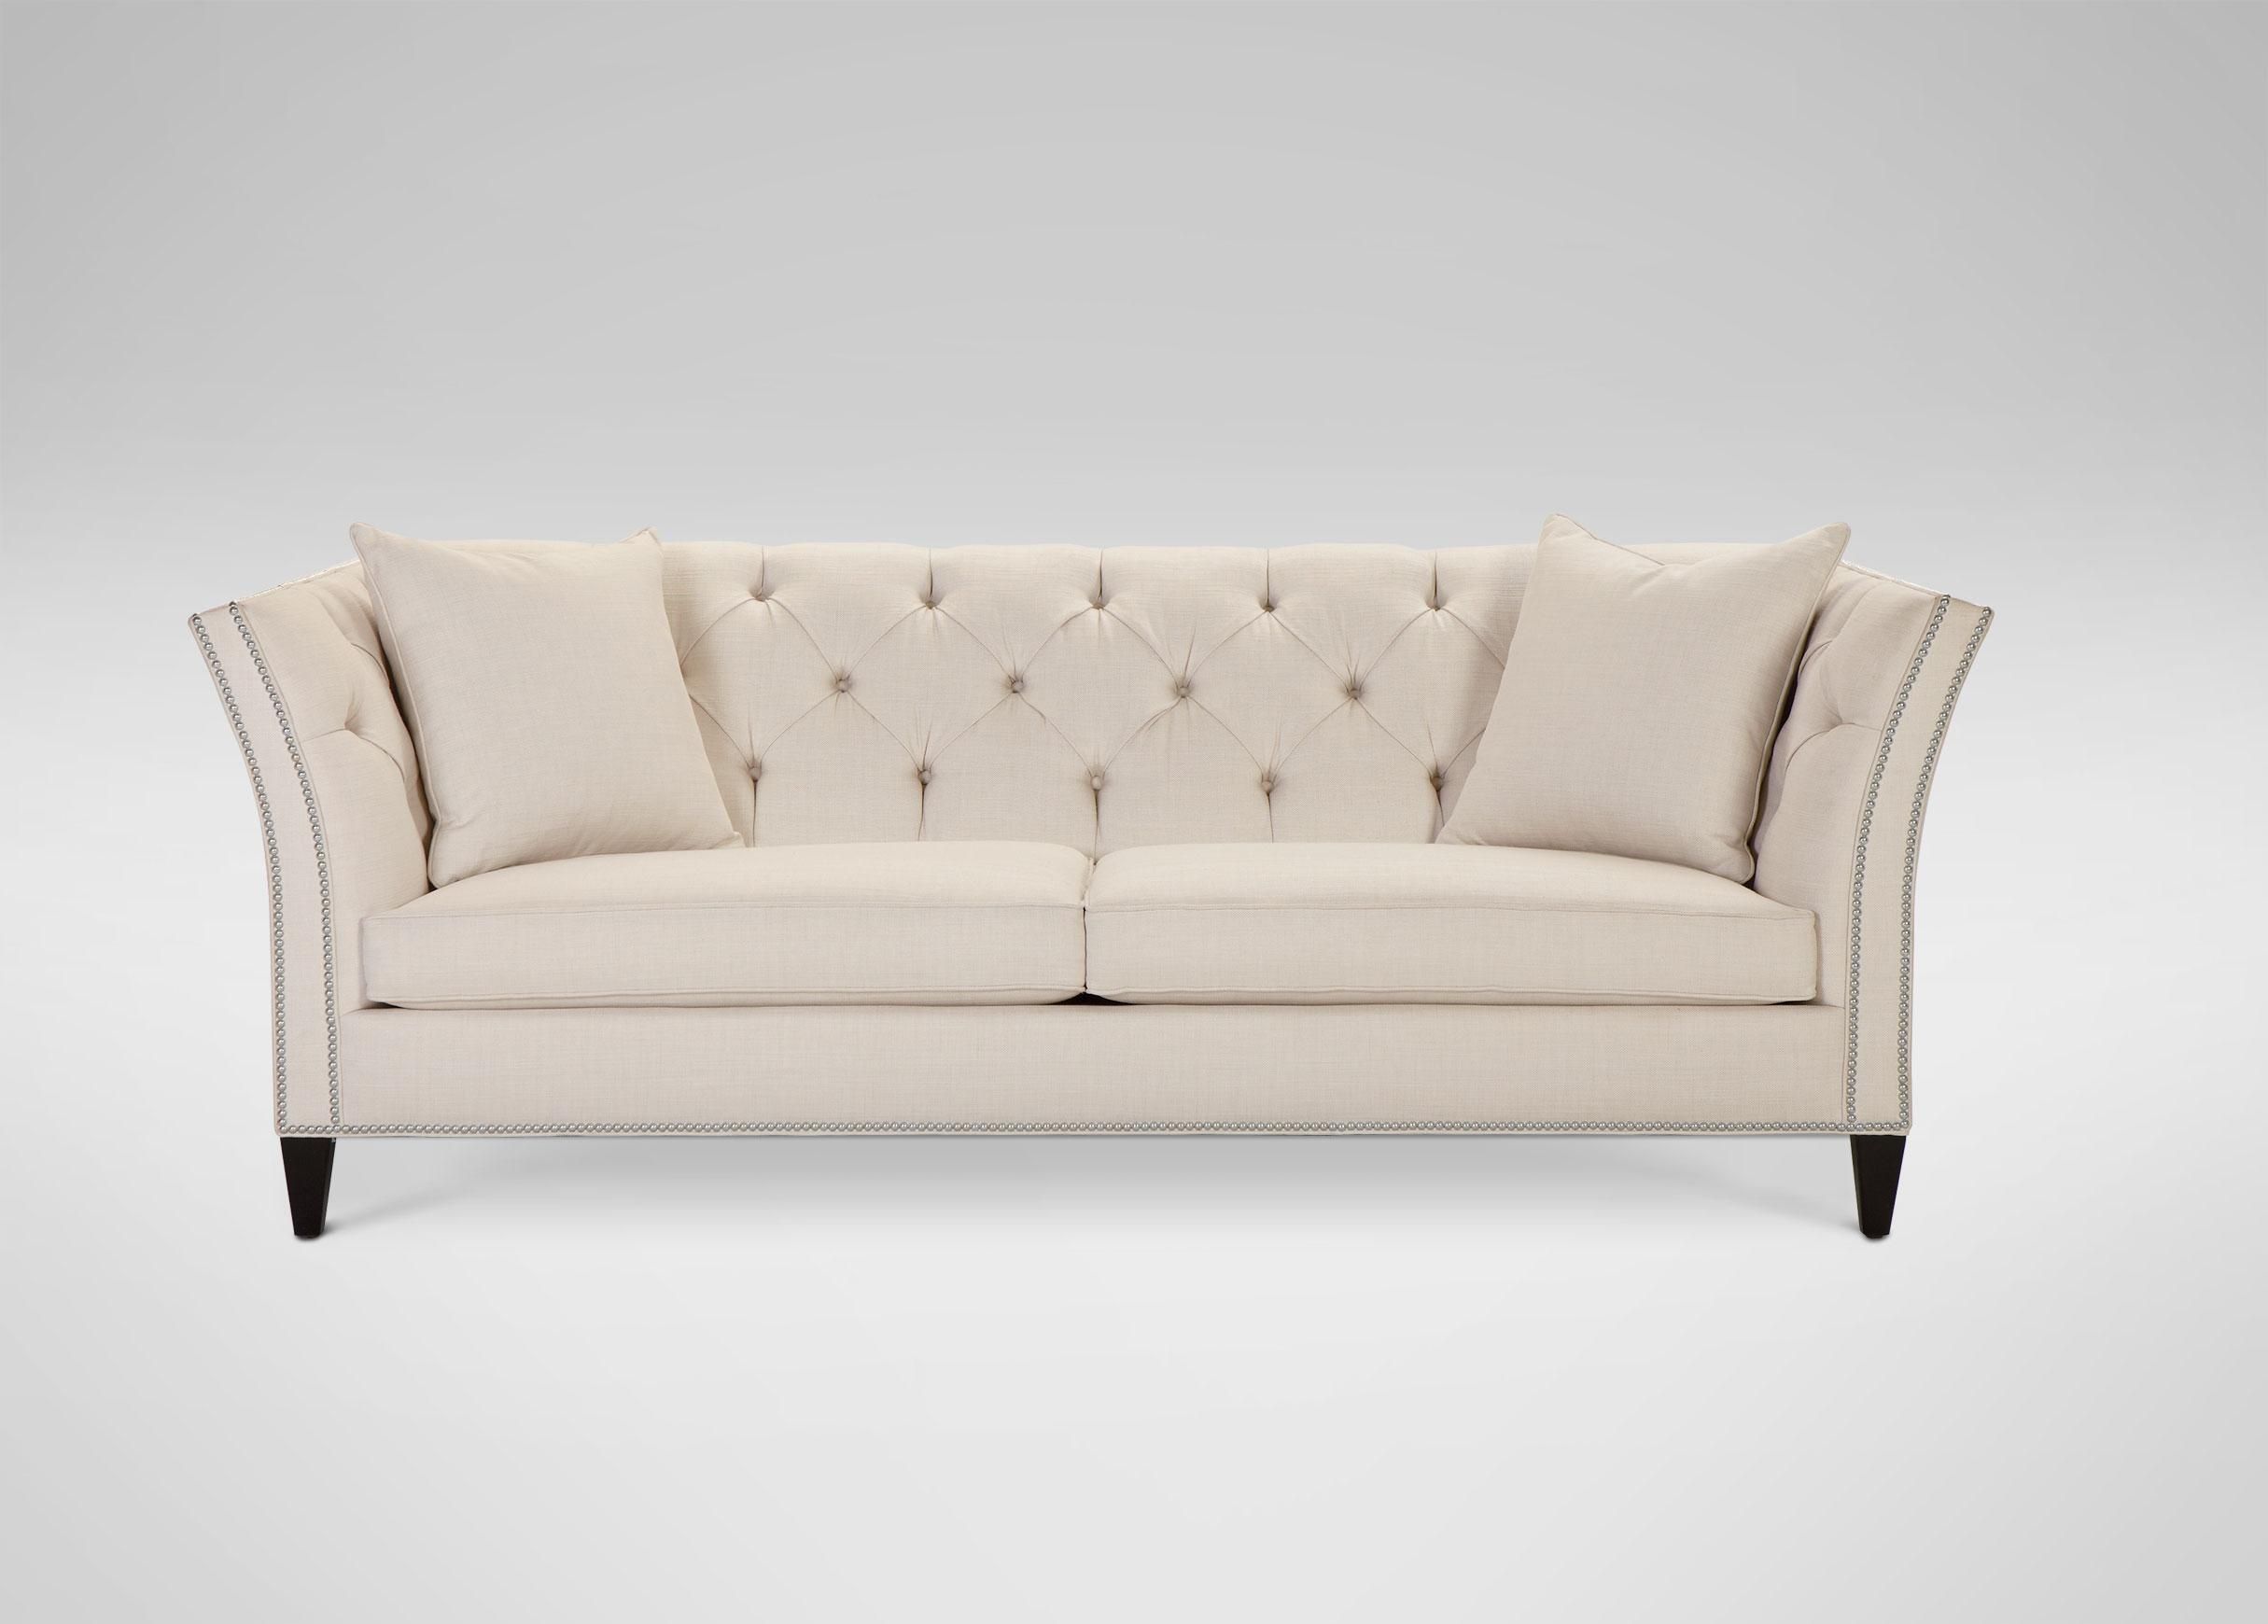 Shelton Sofa | Sofas & Loveseats Inside Ethan Allen Sofas And Chairs (View 1 of 20)